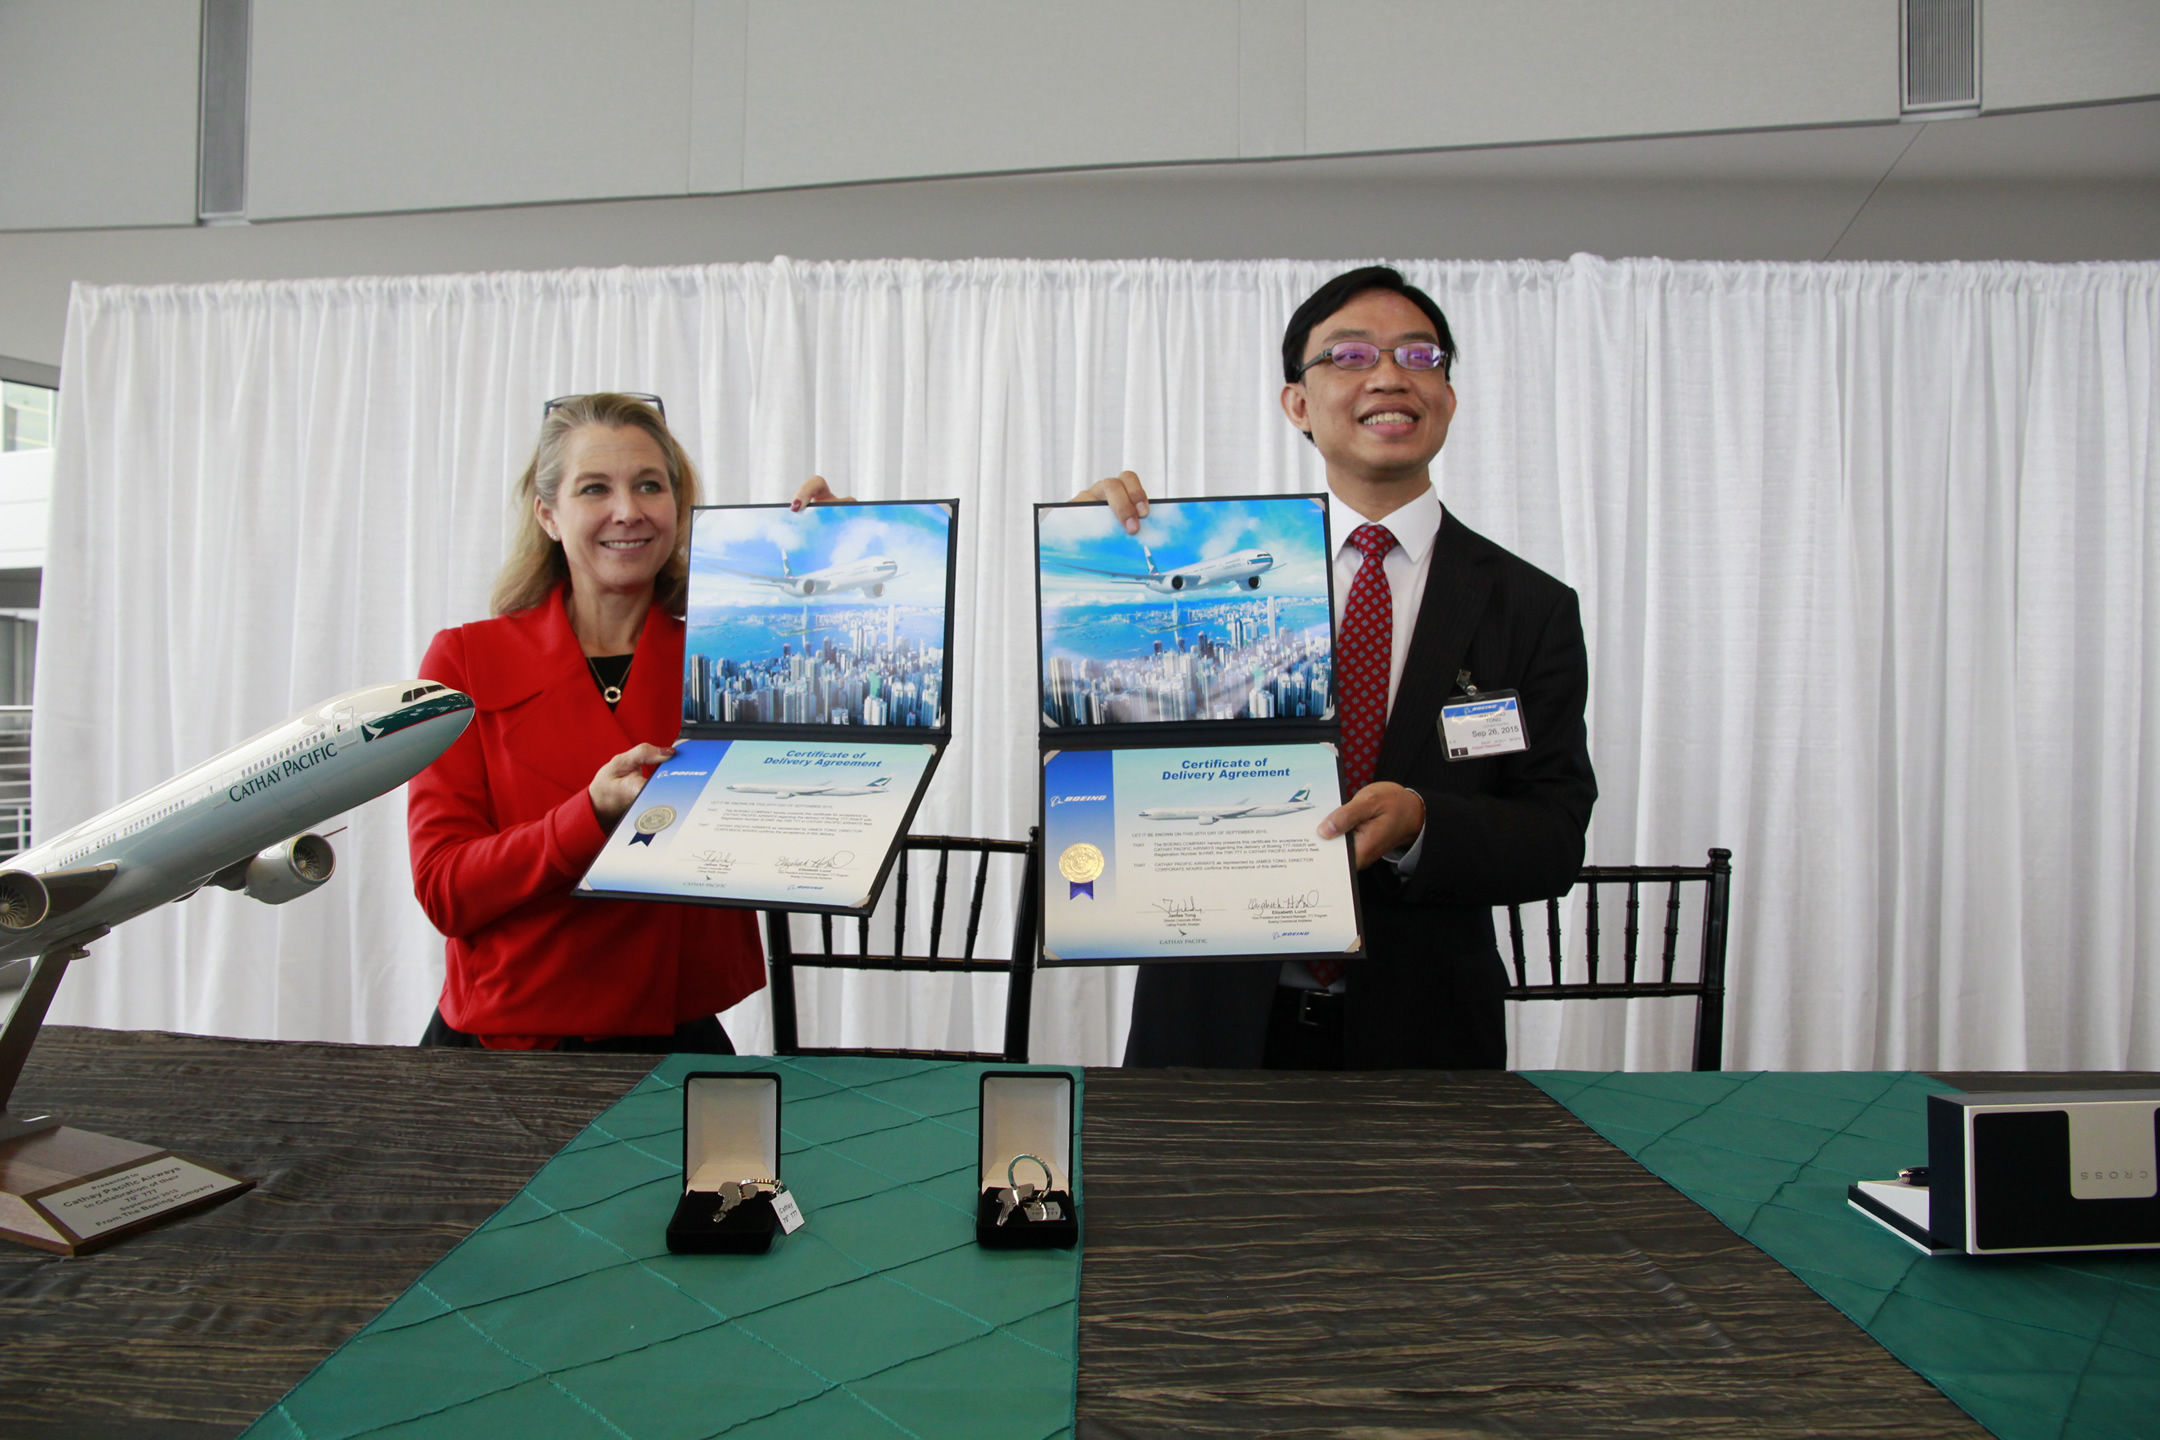 Ms Elizabeth H Lund, Vice President and General Manager, 777 Program and Everett Site, Boeing Commercial Airplanes (left) and Mr James Tong, Director Corporate Affairs, Cathay Pacific Airways at the signing ceremony for Cathay Pacific's 70th 777 aircraft. Cathay Pacific took delivery of the 777-300ER aircraft on 26 September 2015 and is Asia's largest operator of the 777 fleet.